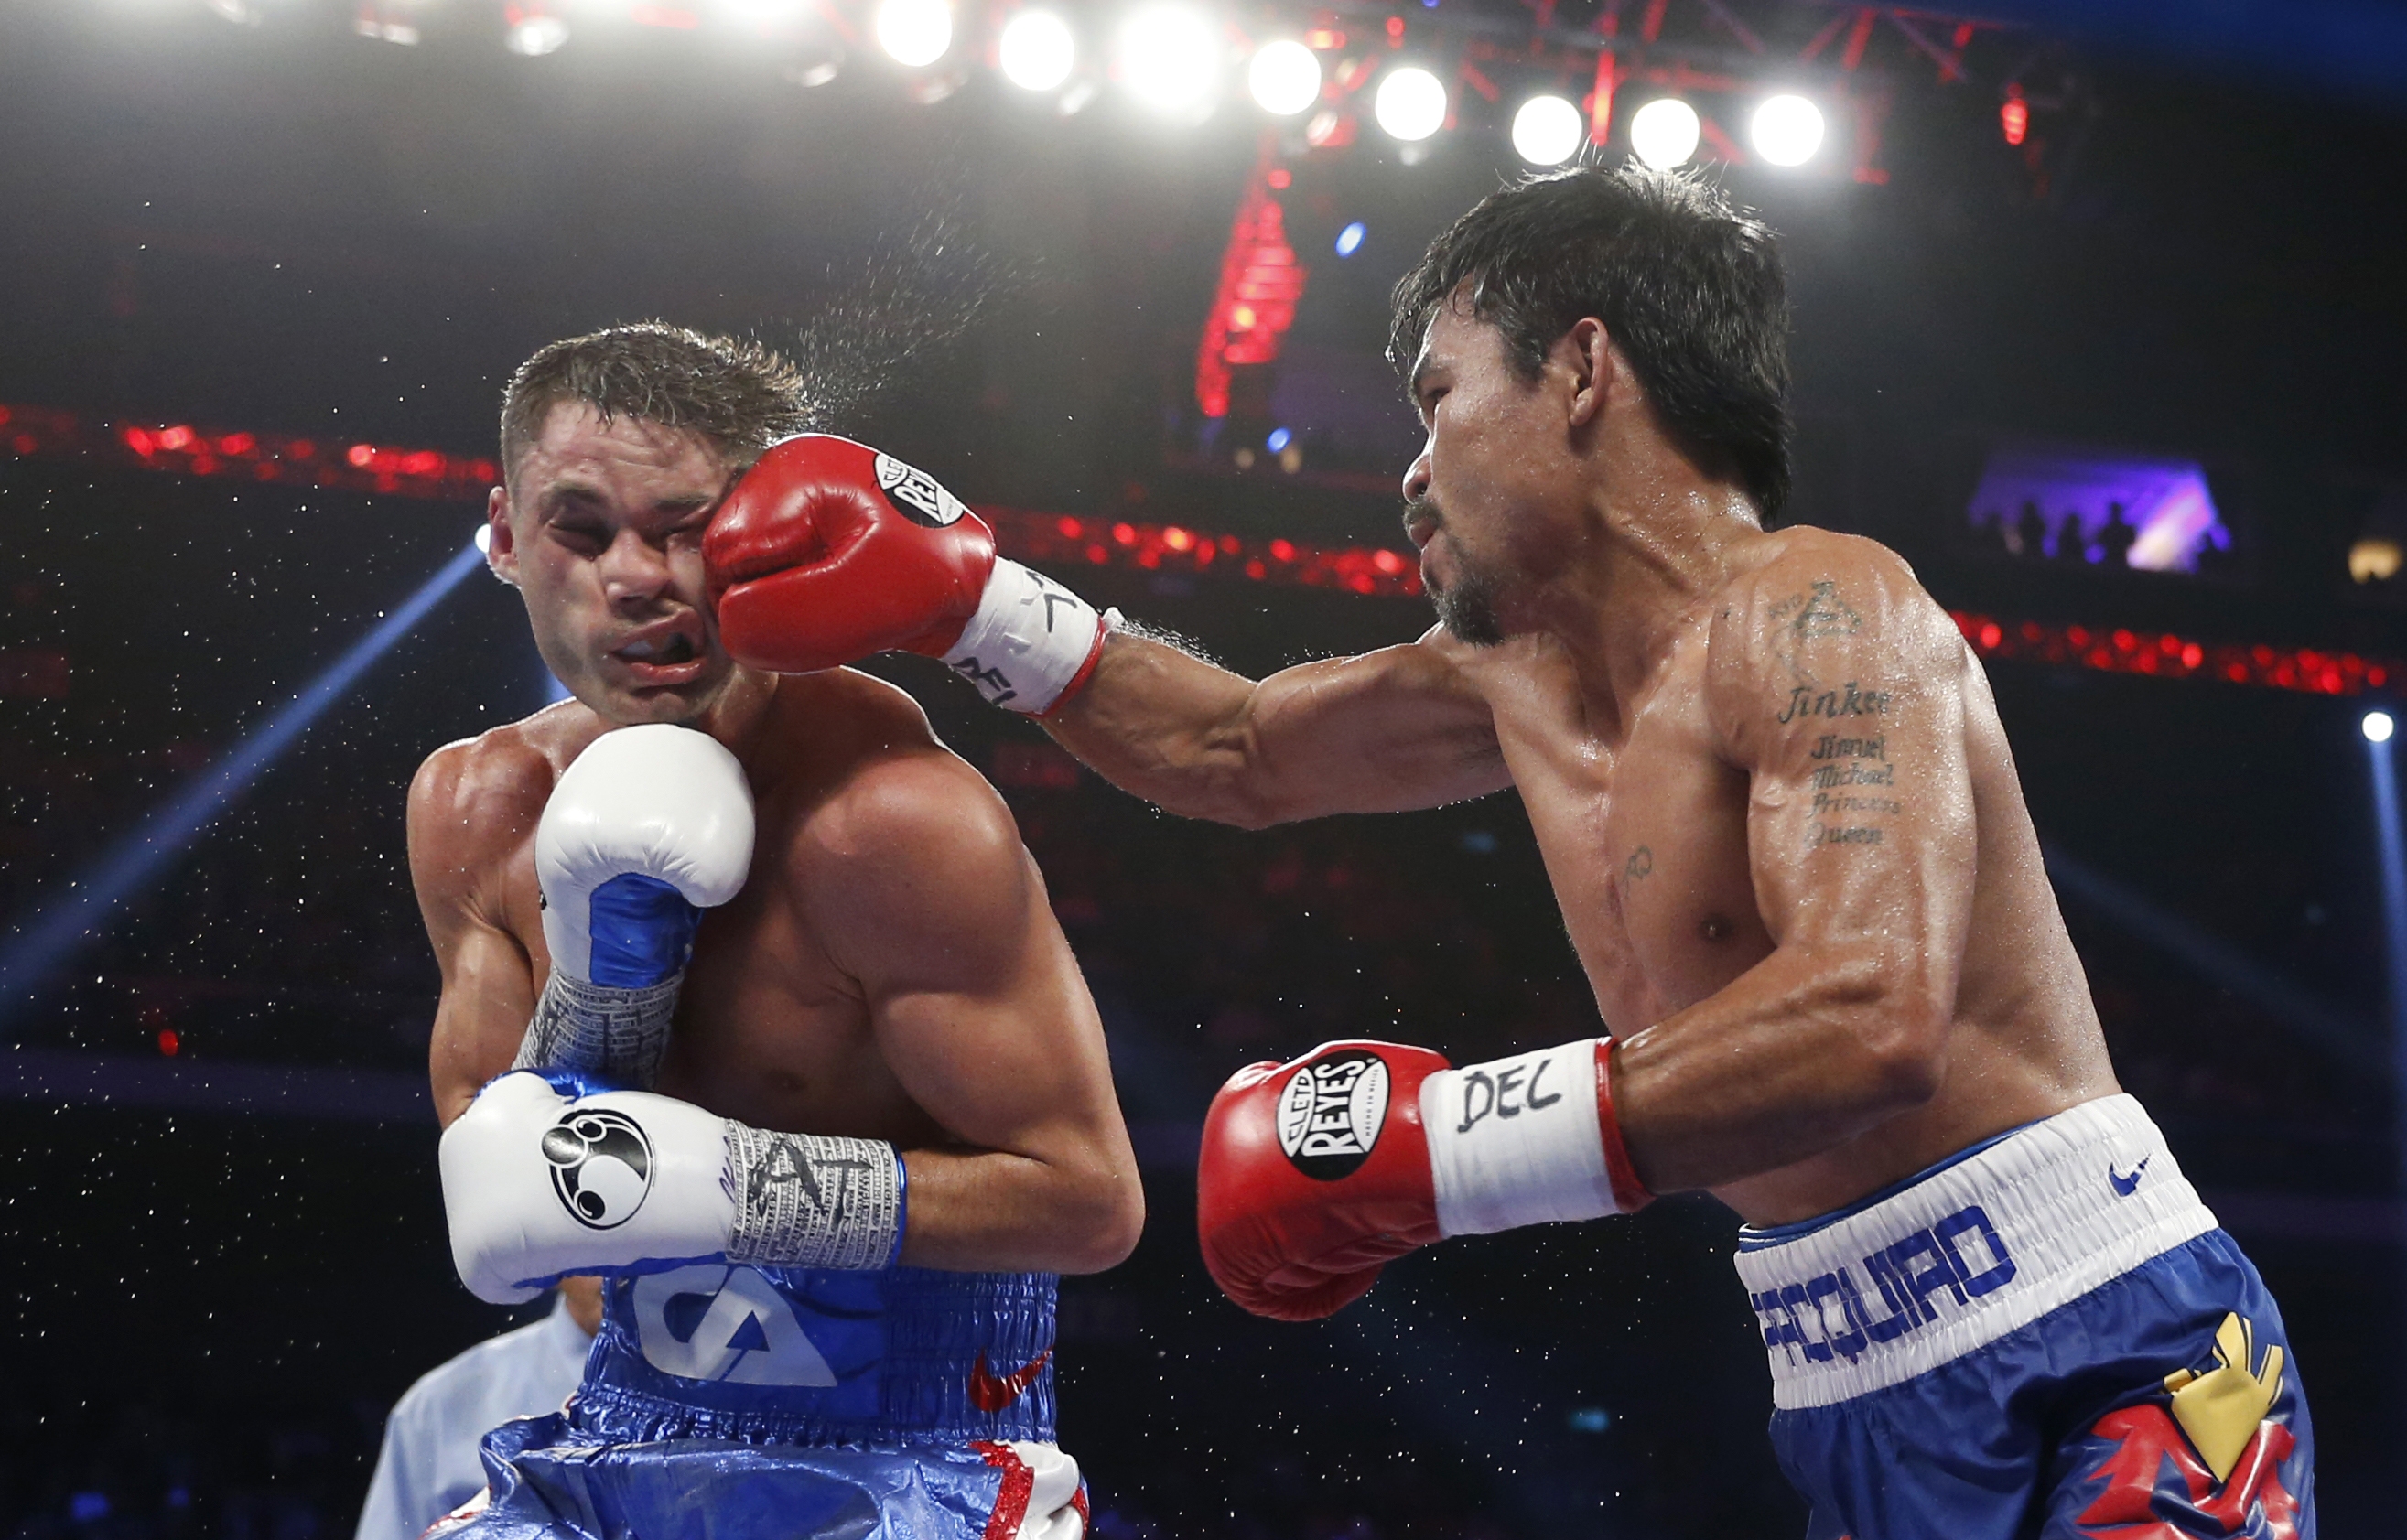 WBO welterweight champion Manny Pacquiao of the Philippines  batters WBO junior welterweight champion Chris Algieri of the U.S. in their world welterweight title boxing match at the Venetian Macao in Macau. (AP PHOTO)